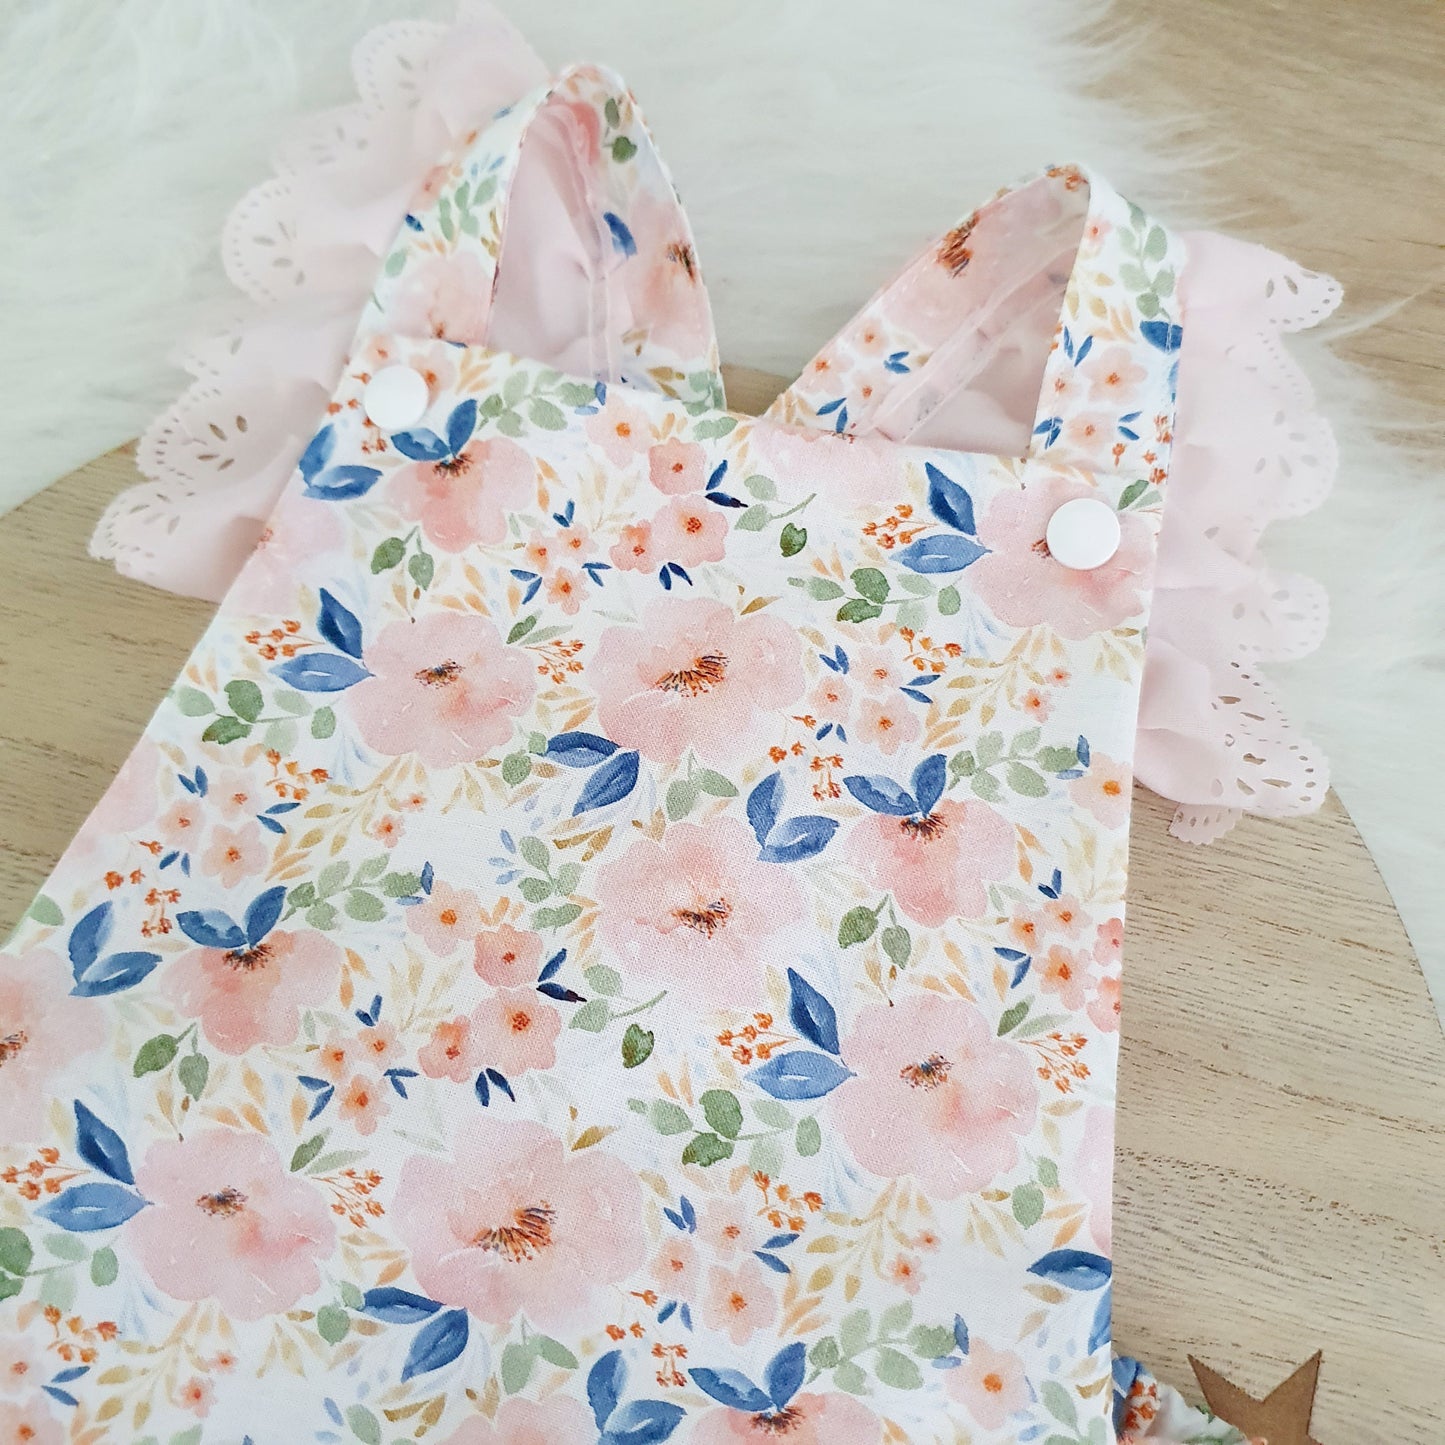 PEACHY BLOOMS Baby Romper with trim, Handmade Baby Clothing, Size 1 - 1st Birthday Clothing / Cake Smash Outfit, 12 - 18 months